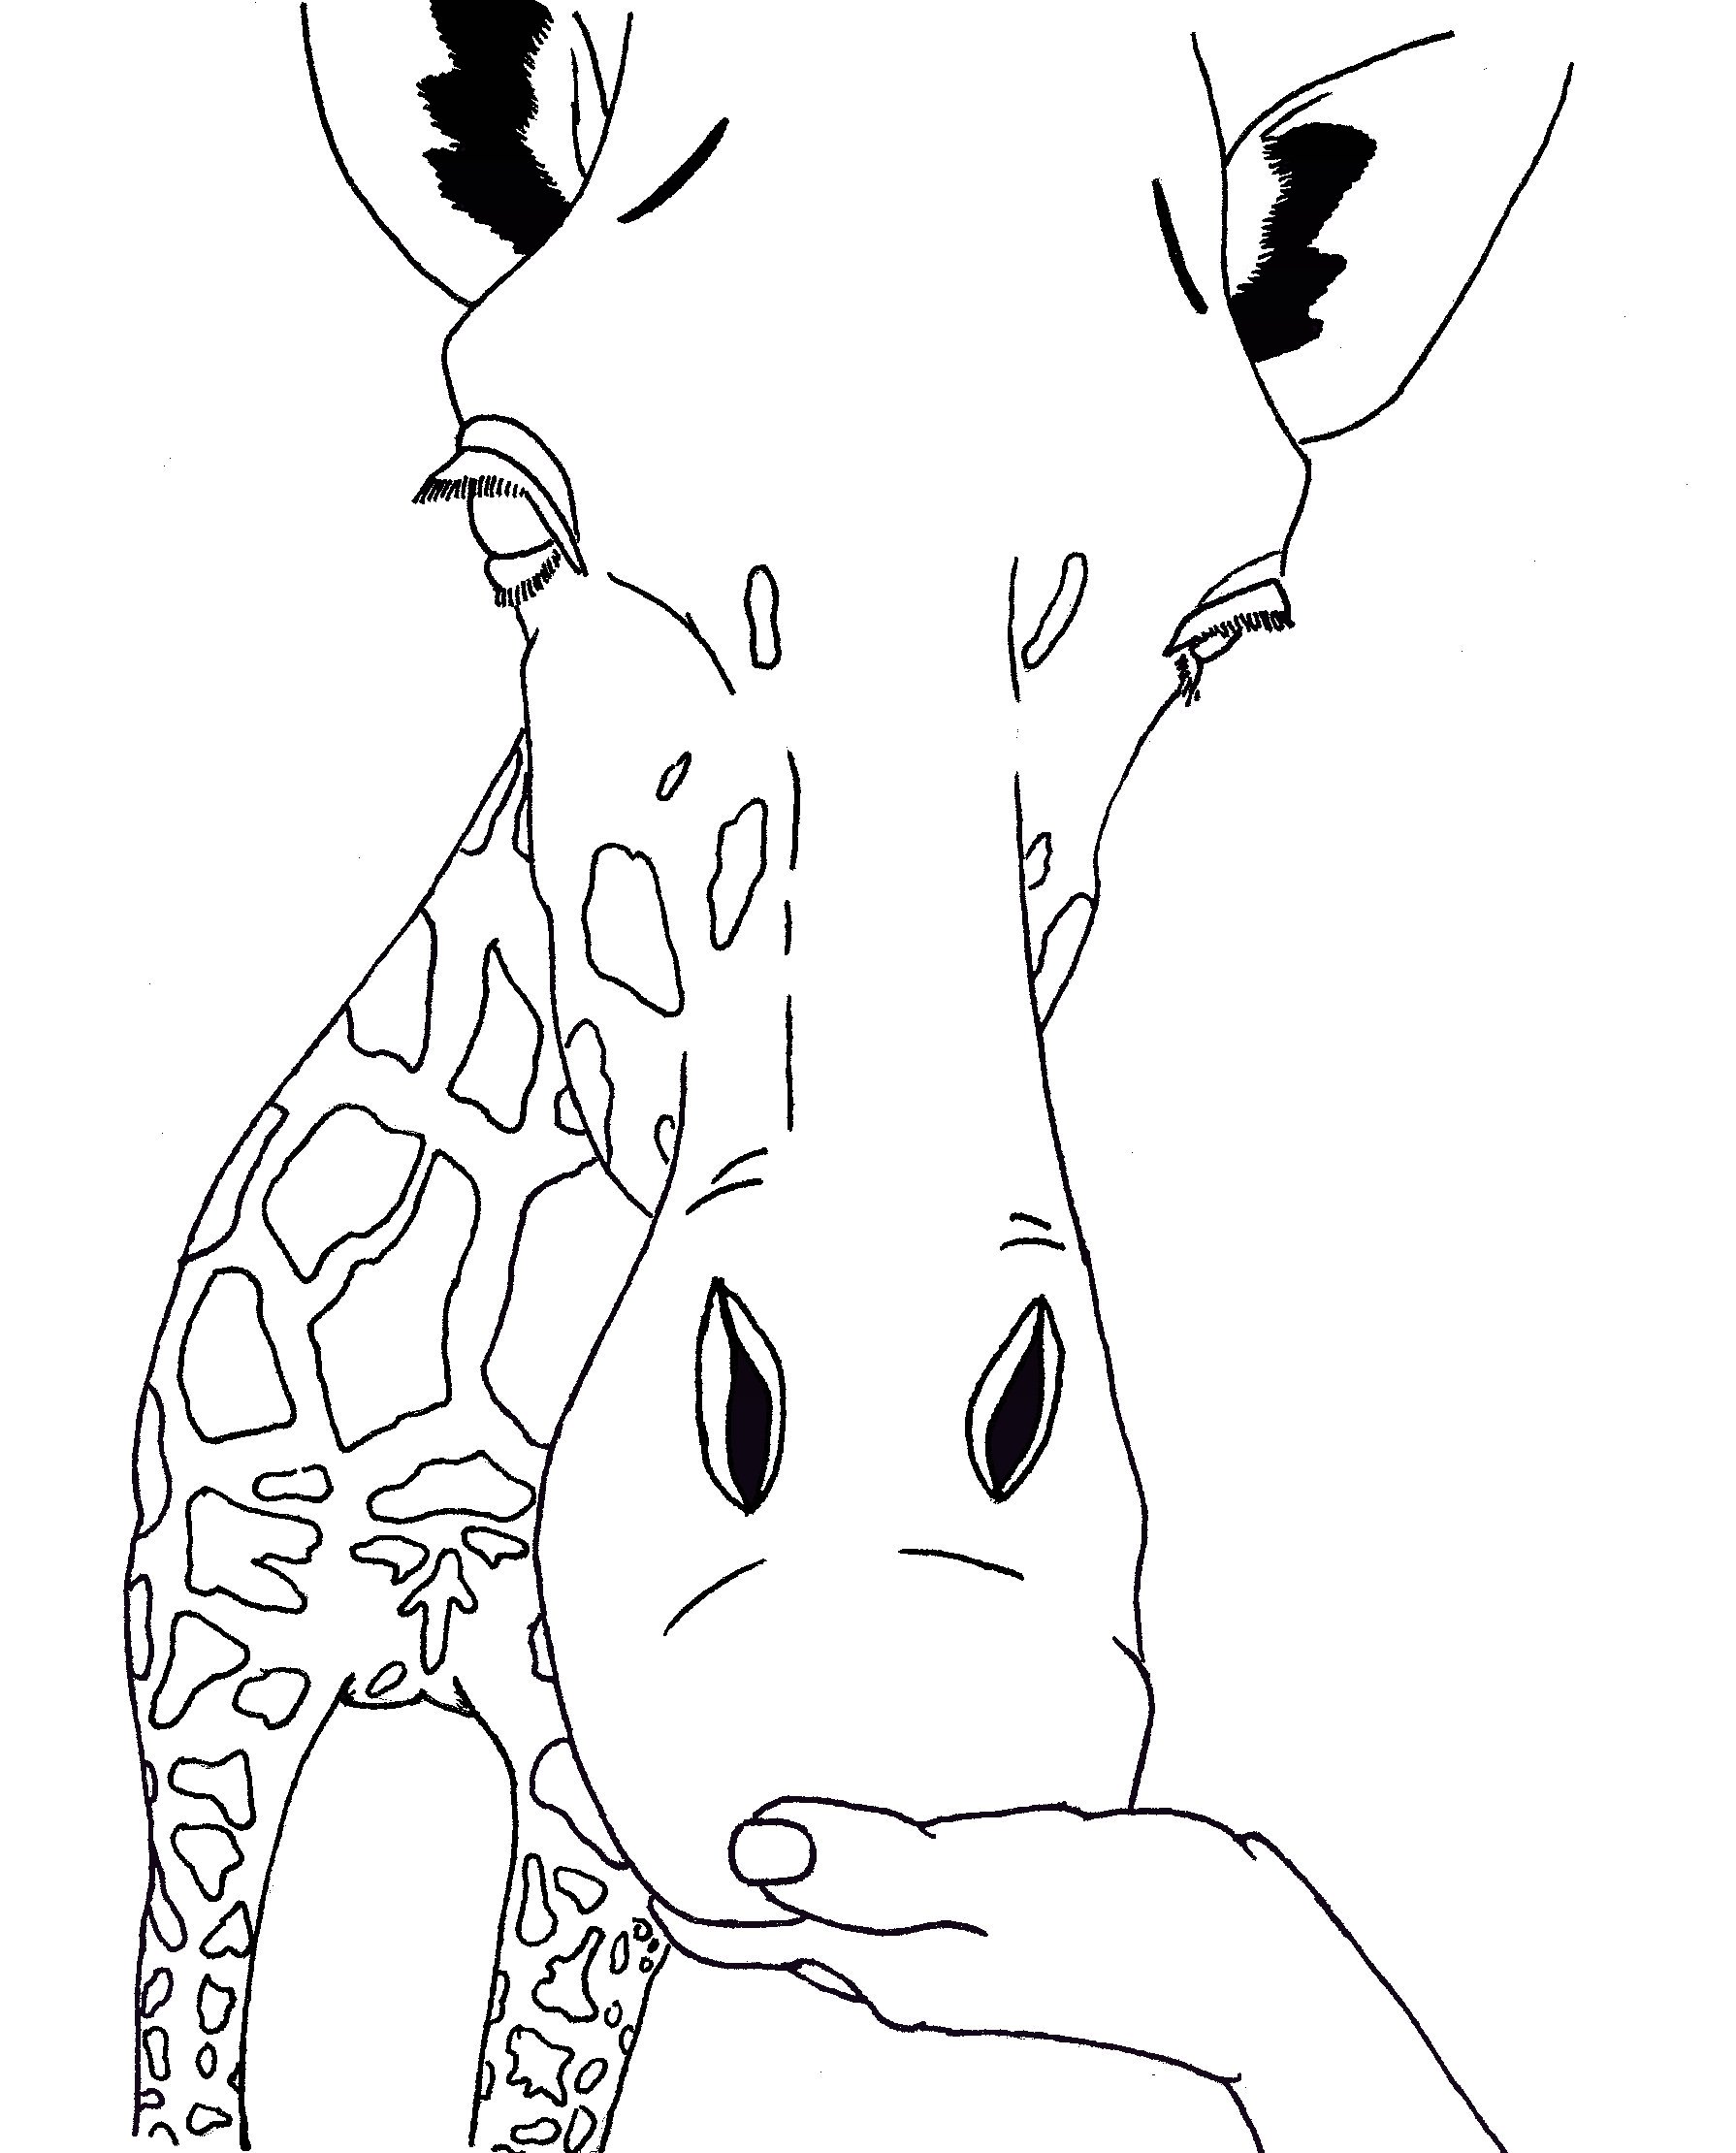 Coloring-Page-of-Giraffe-Face